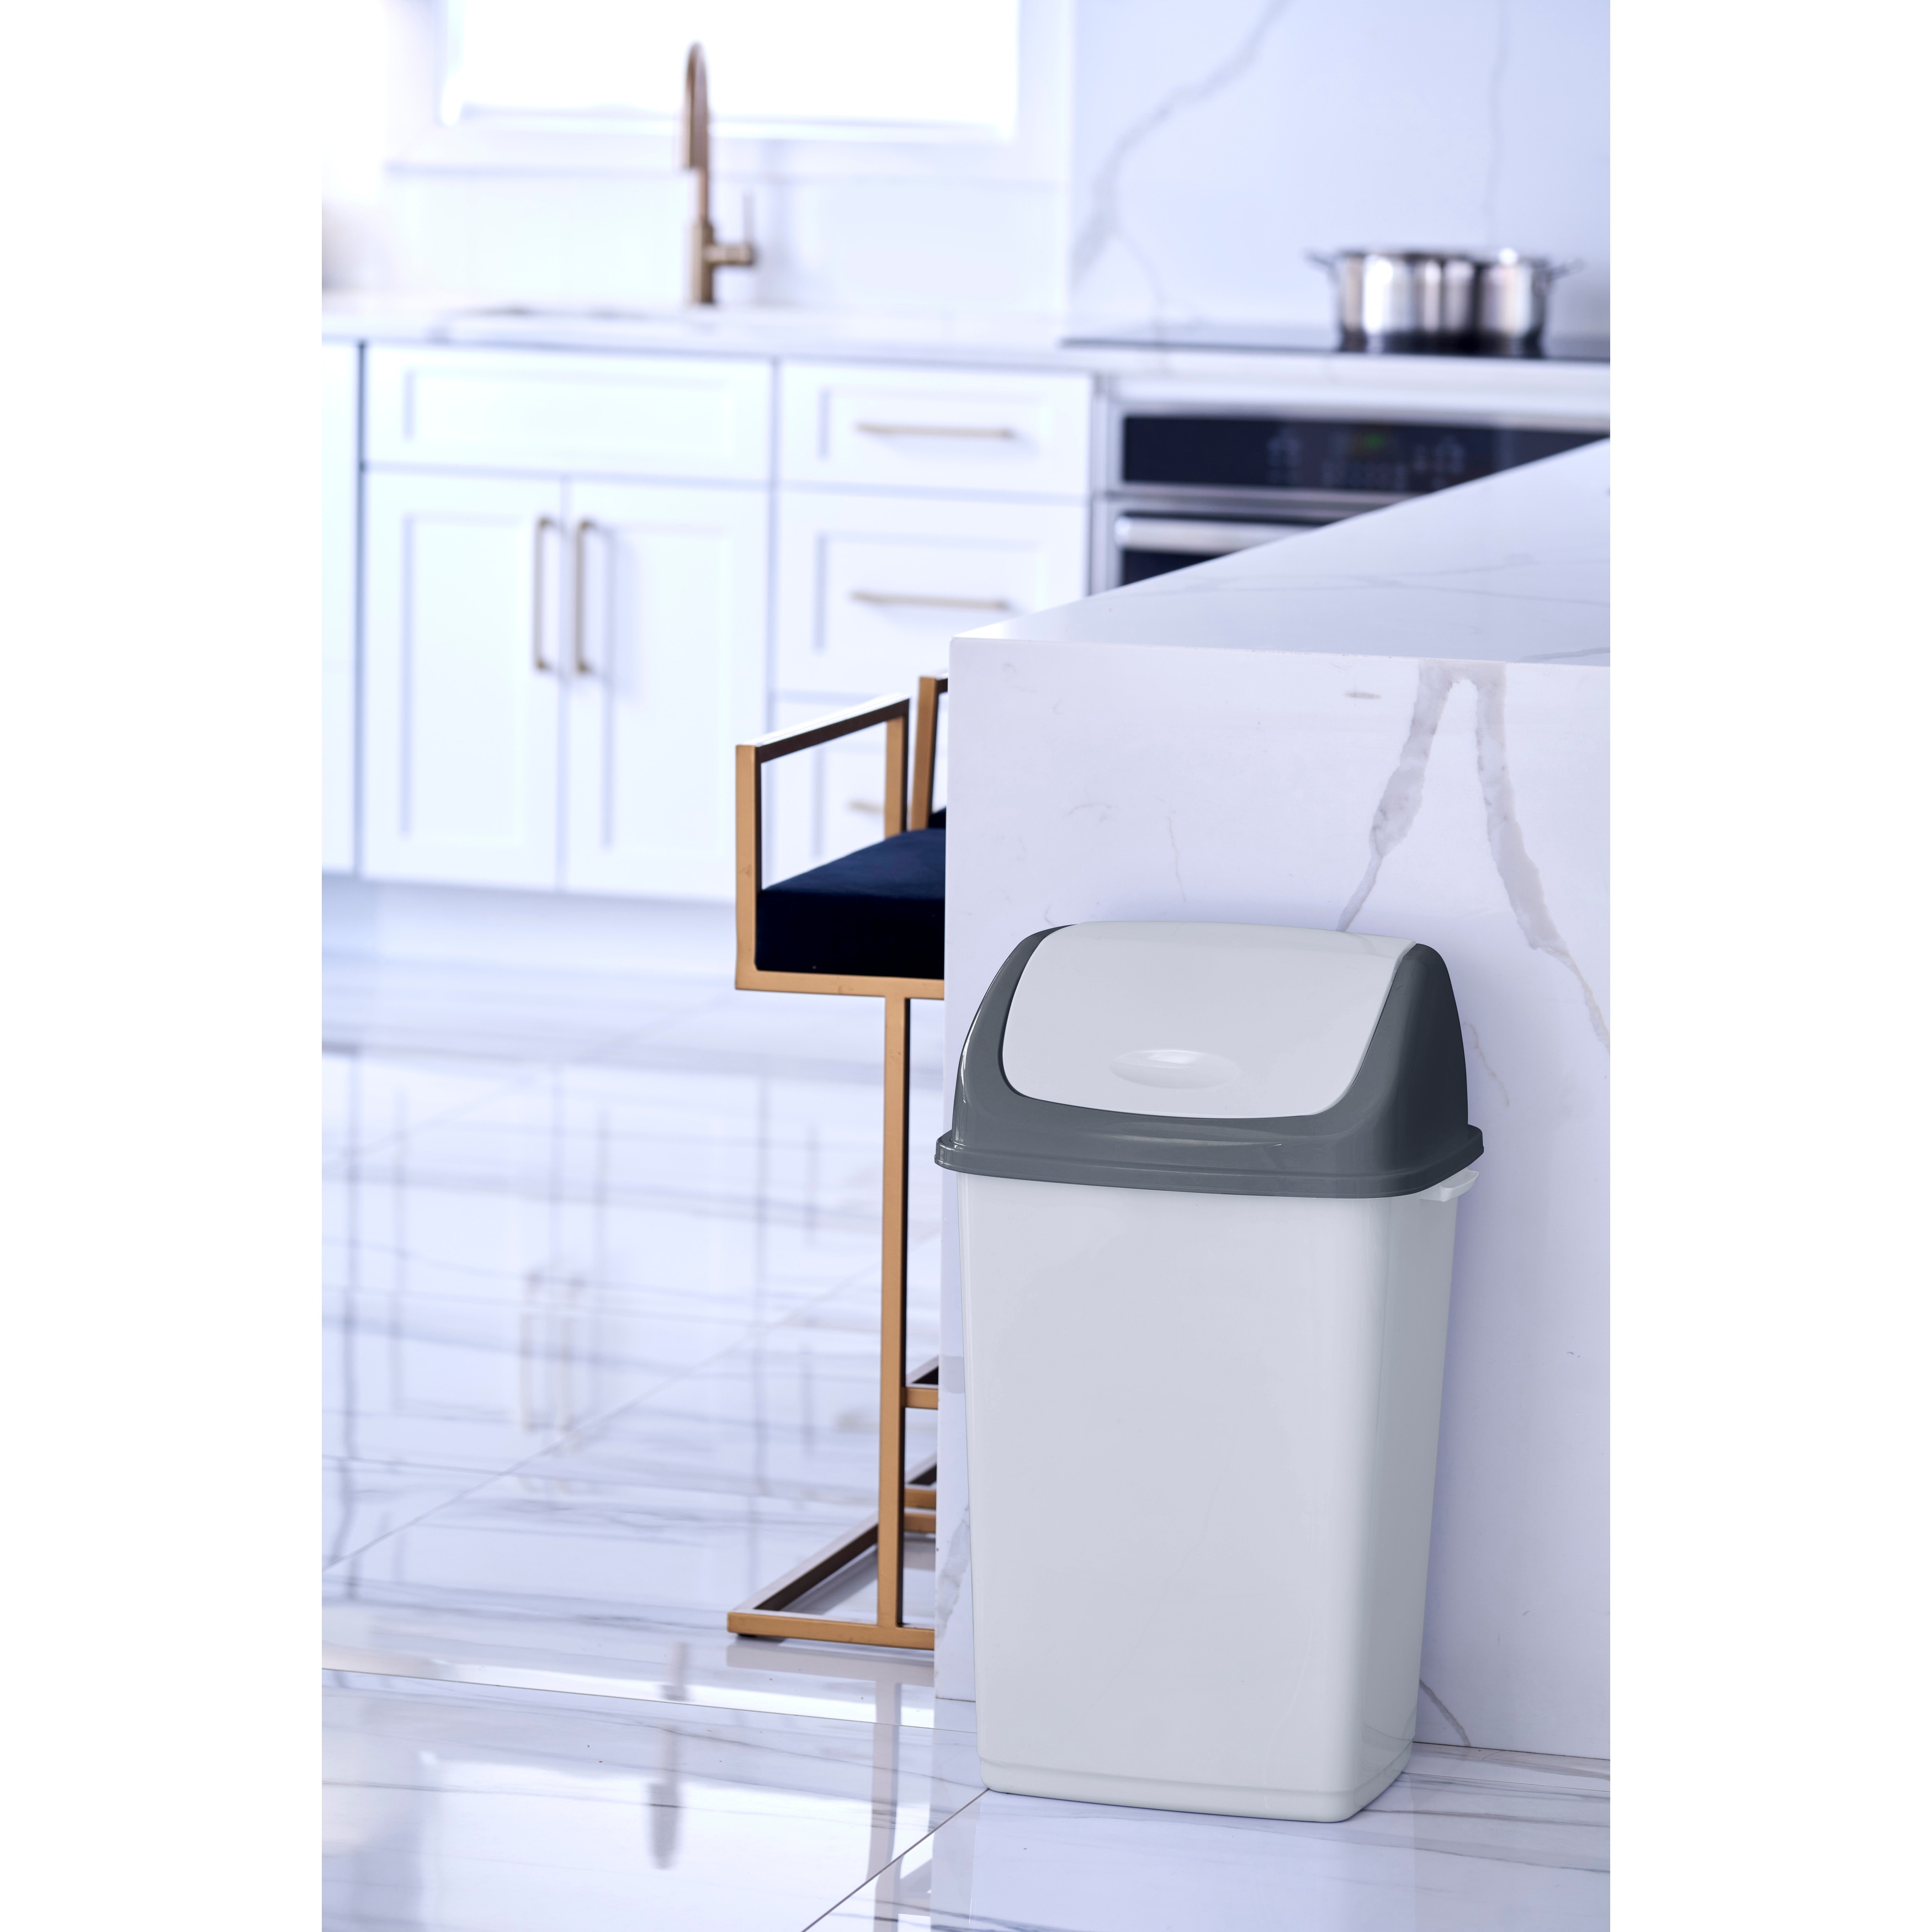 https://ak1.ostkcdn.com/images/products/is/images/direct/9a0badb6a1e6ded164a6ad01add5a1336ab6635b/Superio-13-gal-Swing-Top-Trash-Can.jpg